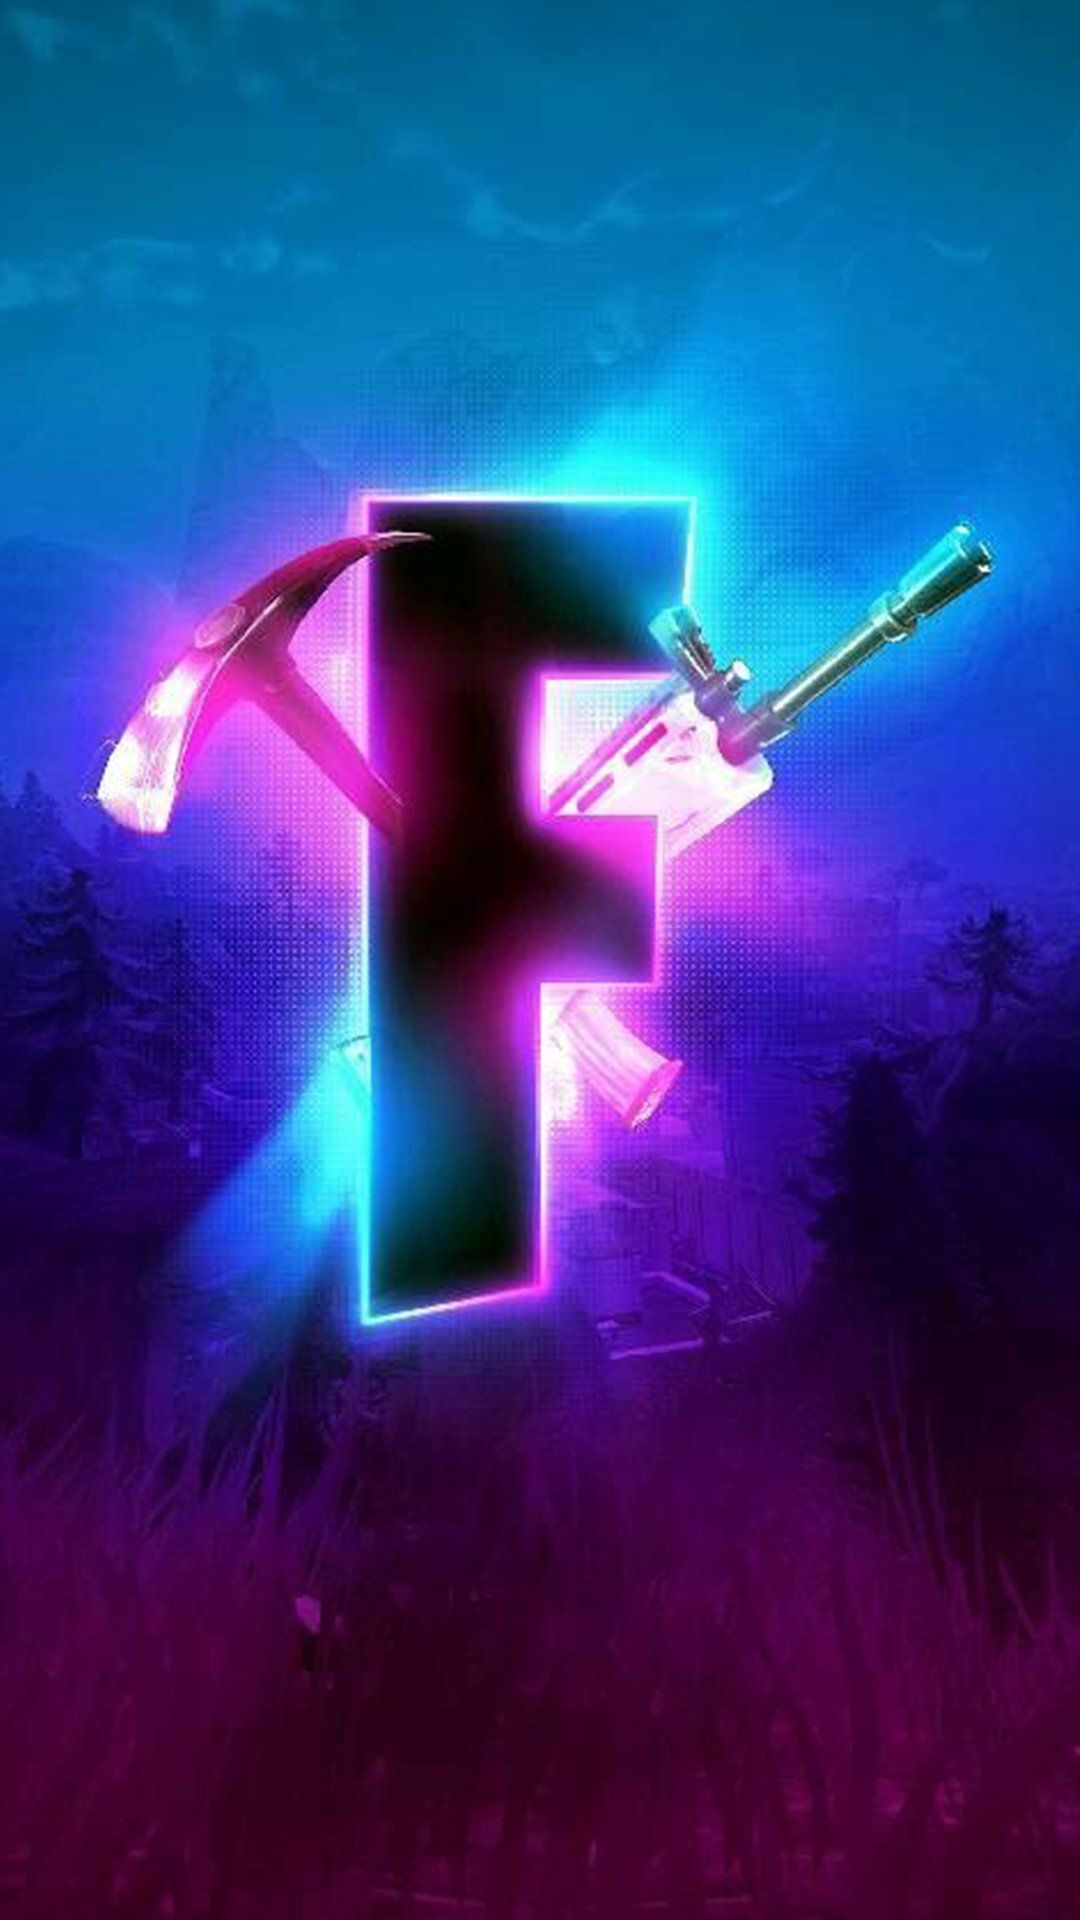 Fortnite Cool Wallpaper for Your Phone image in 2019